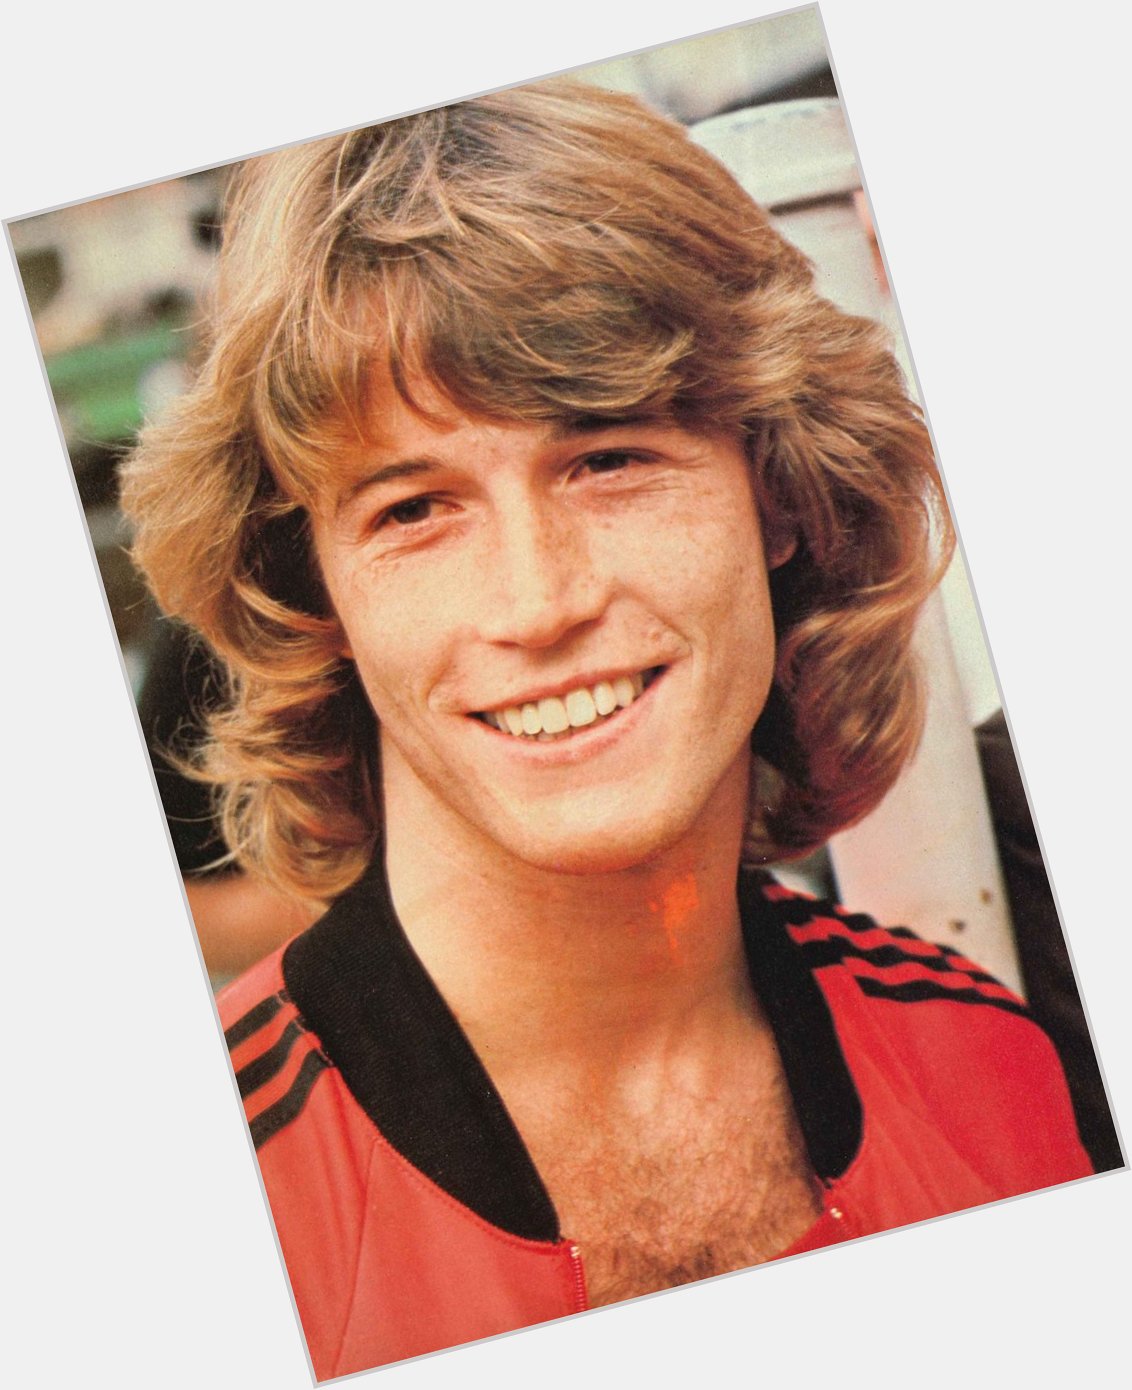 Happy Birthday, Andy Gibb! He would have been 60 this year. I d also like to nominate him as my  